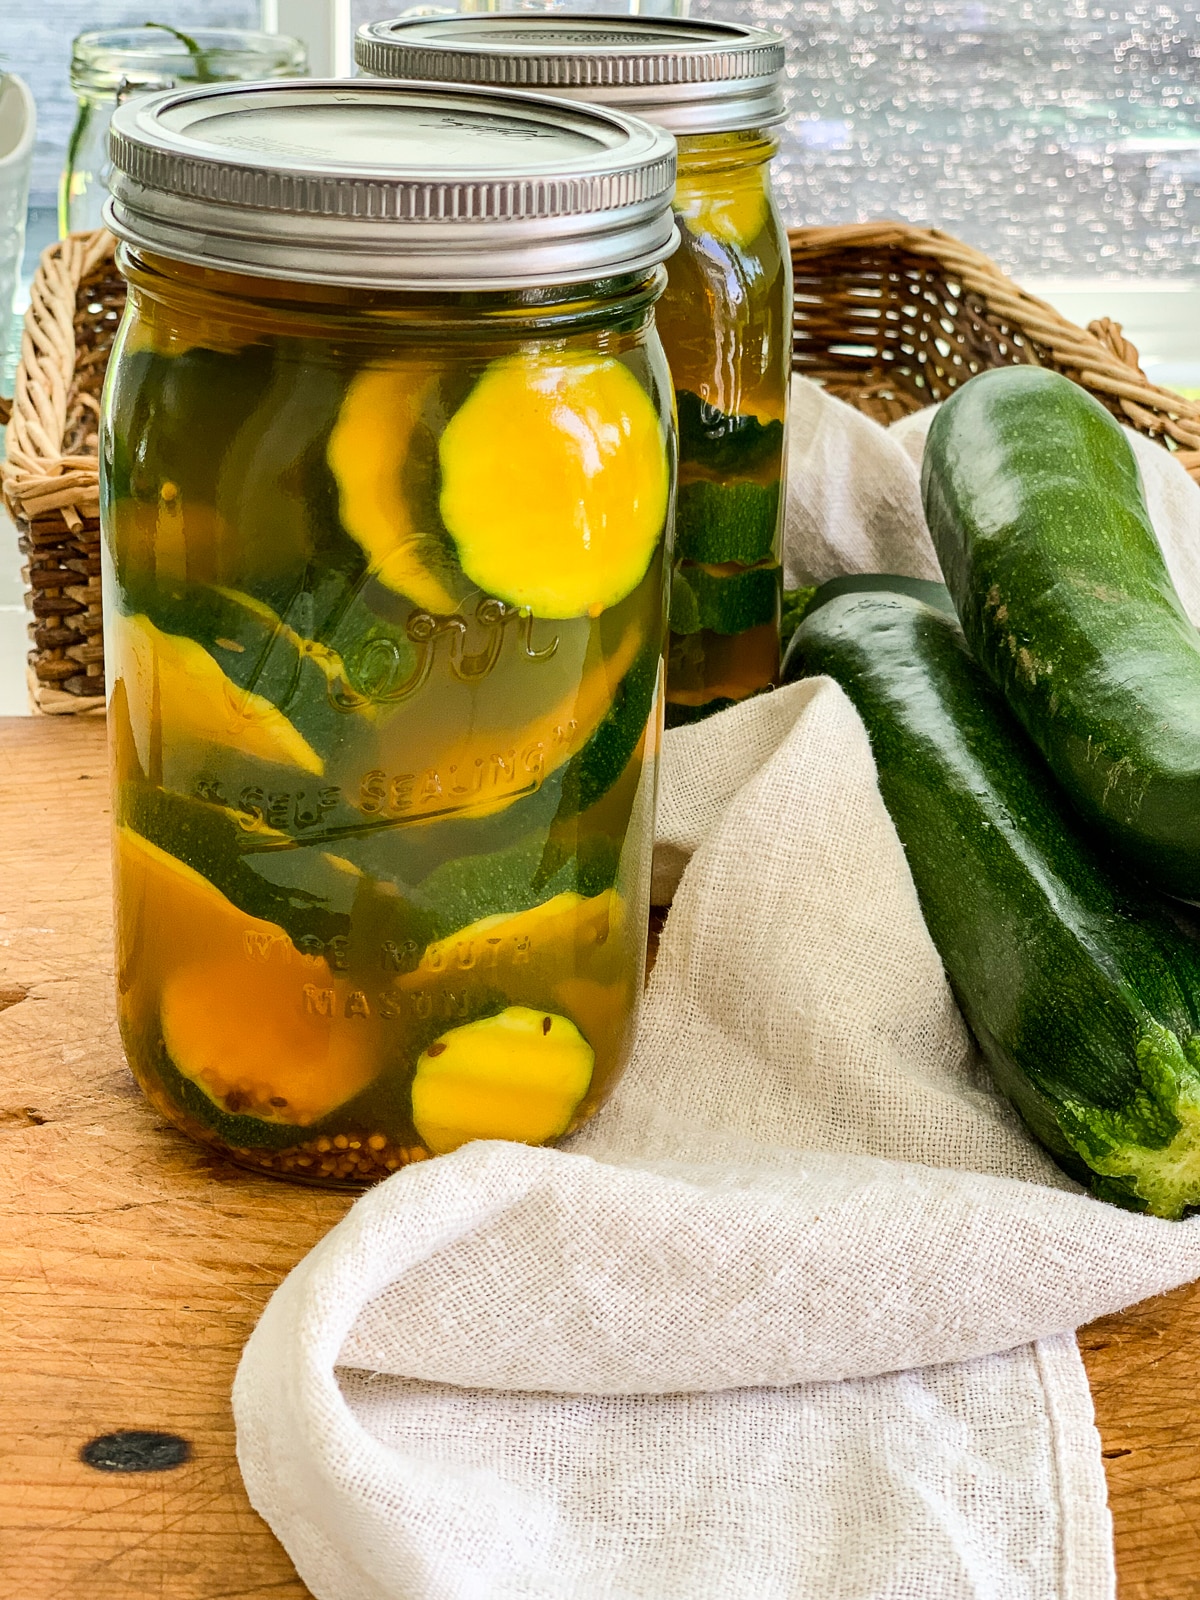 Two jars of pickles made from zucchini squash. 